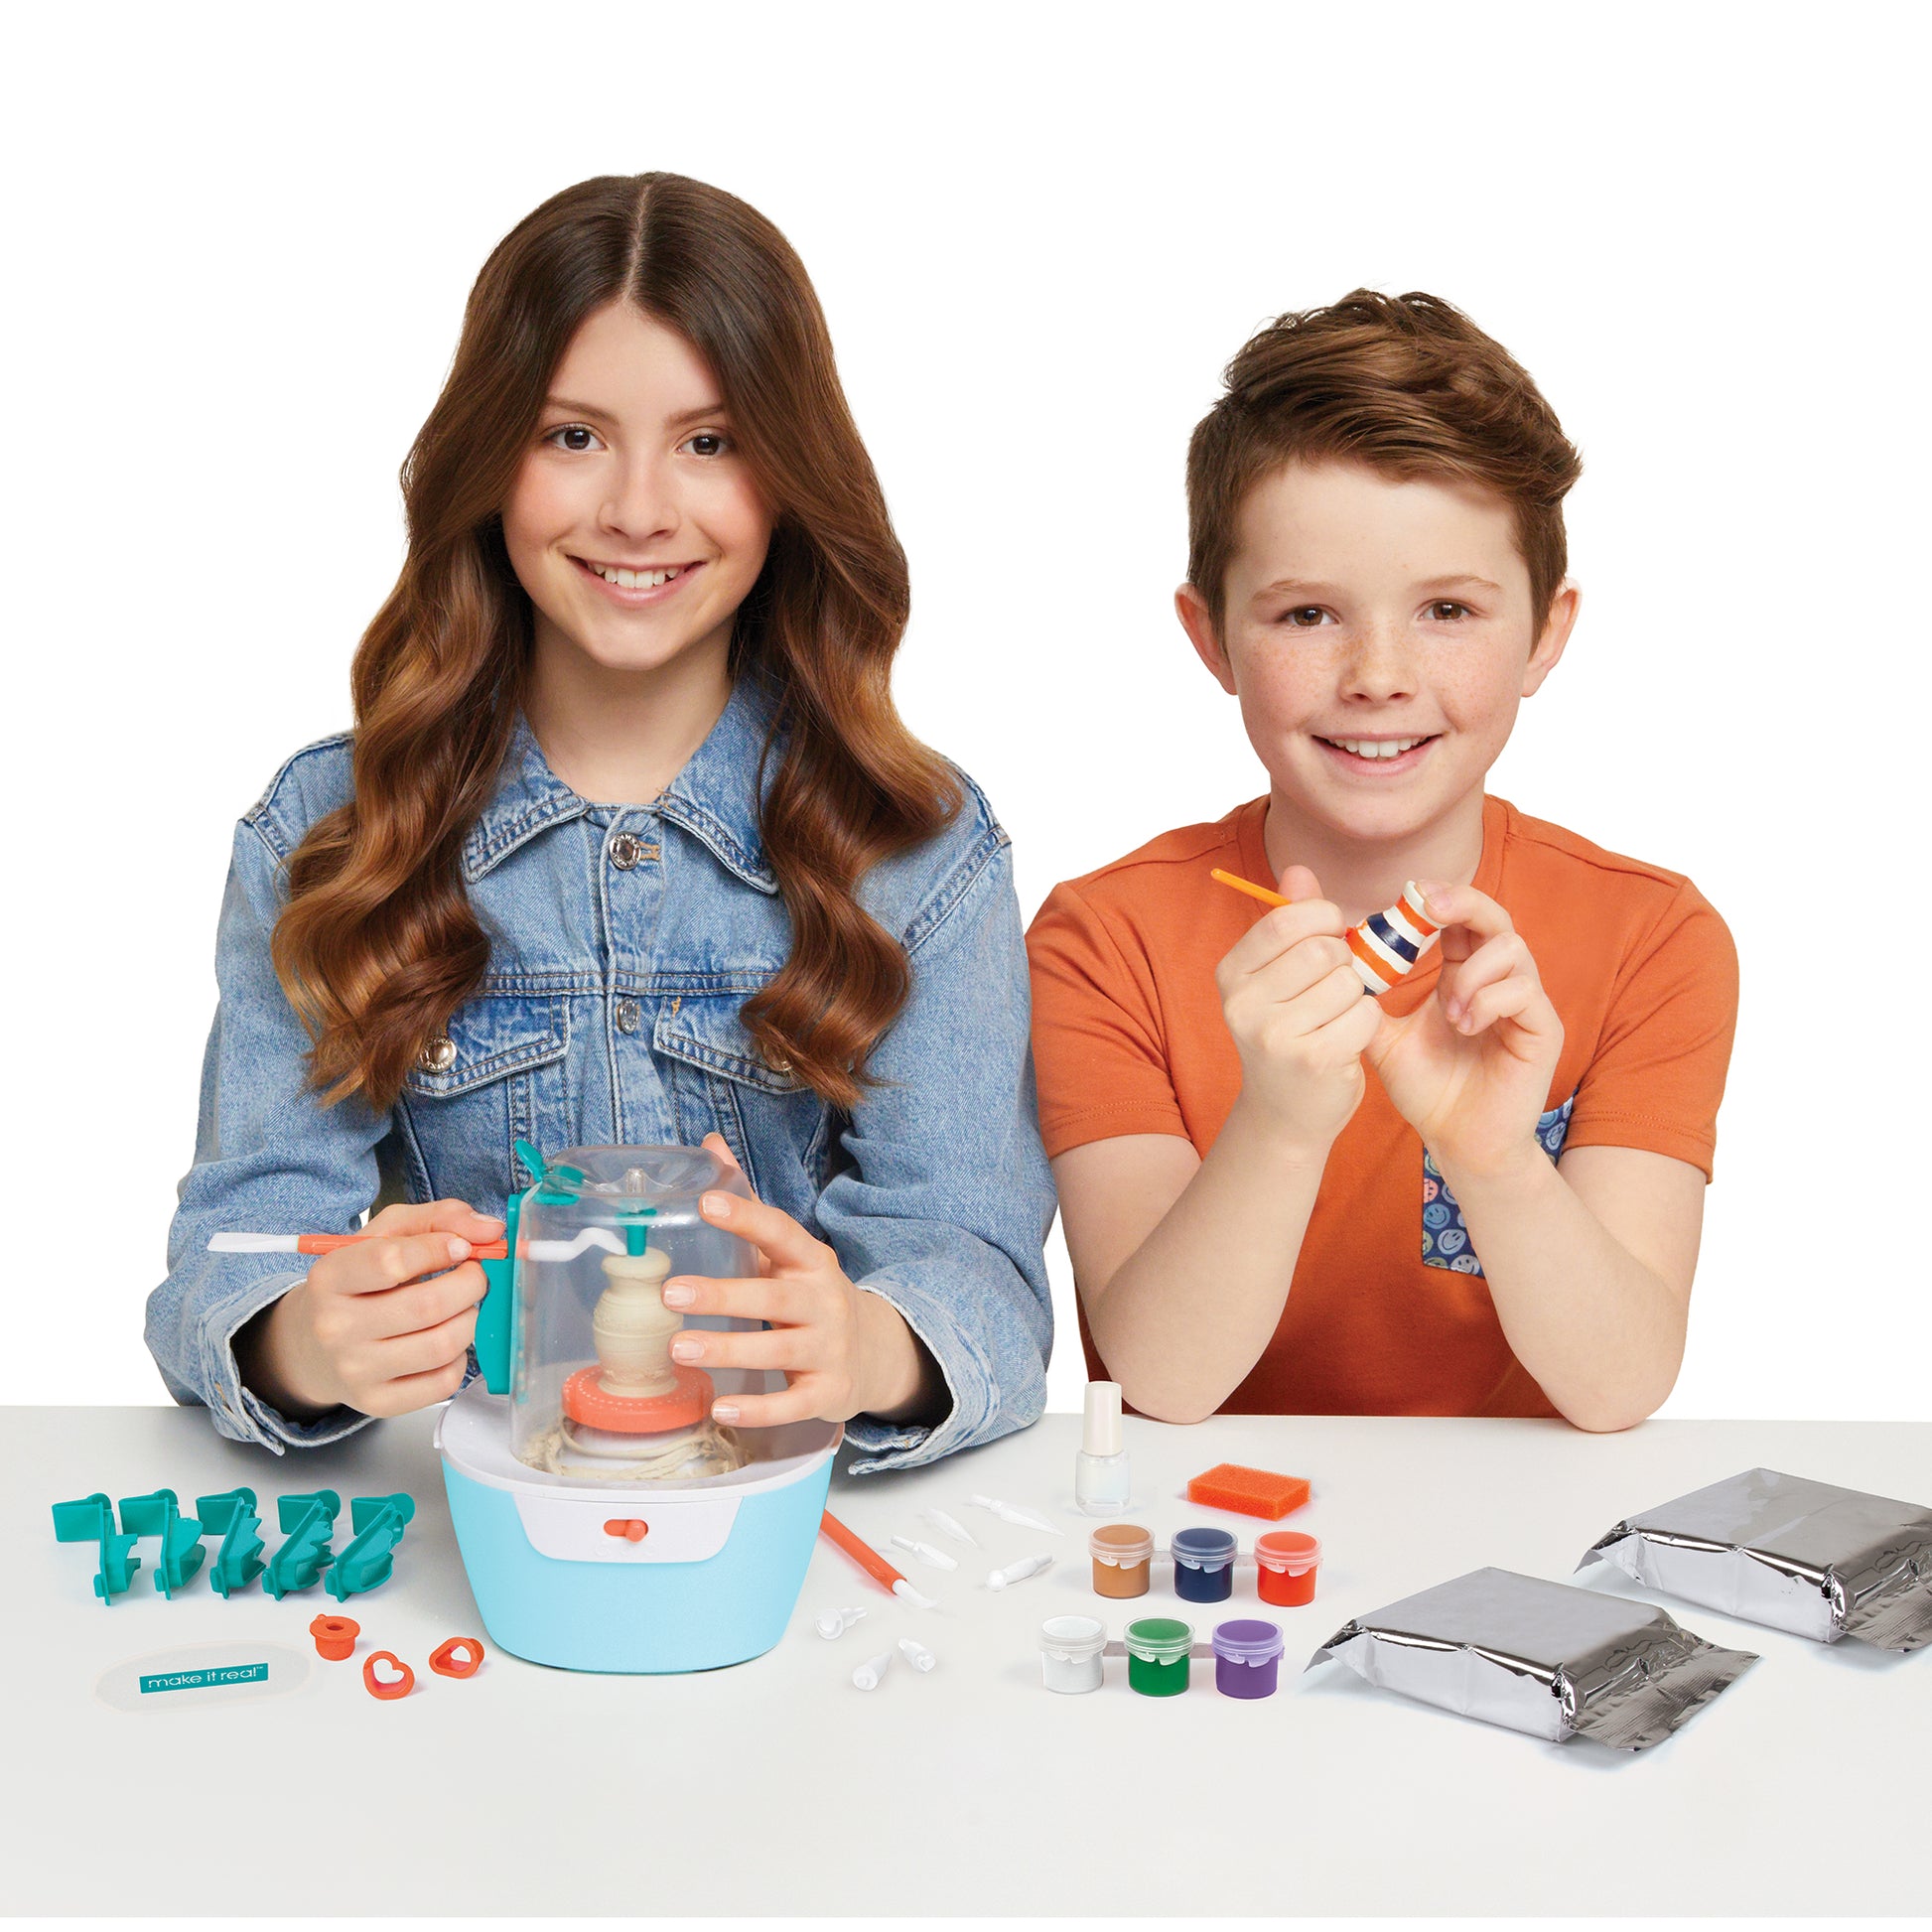 Make It Real: Mini Pottery Studio For Kids-26 Pieces . 10 Projects . Brand  New.